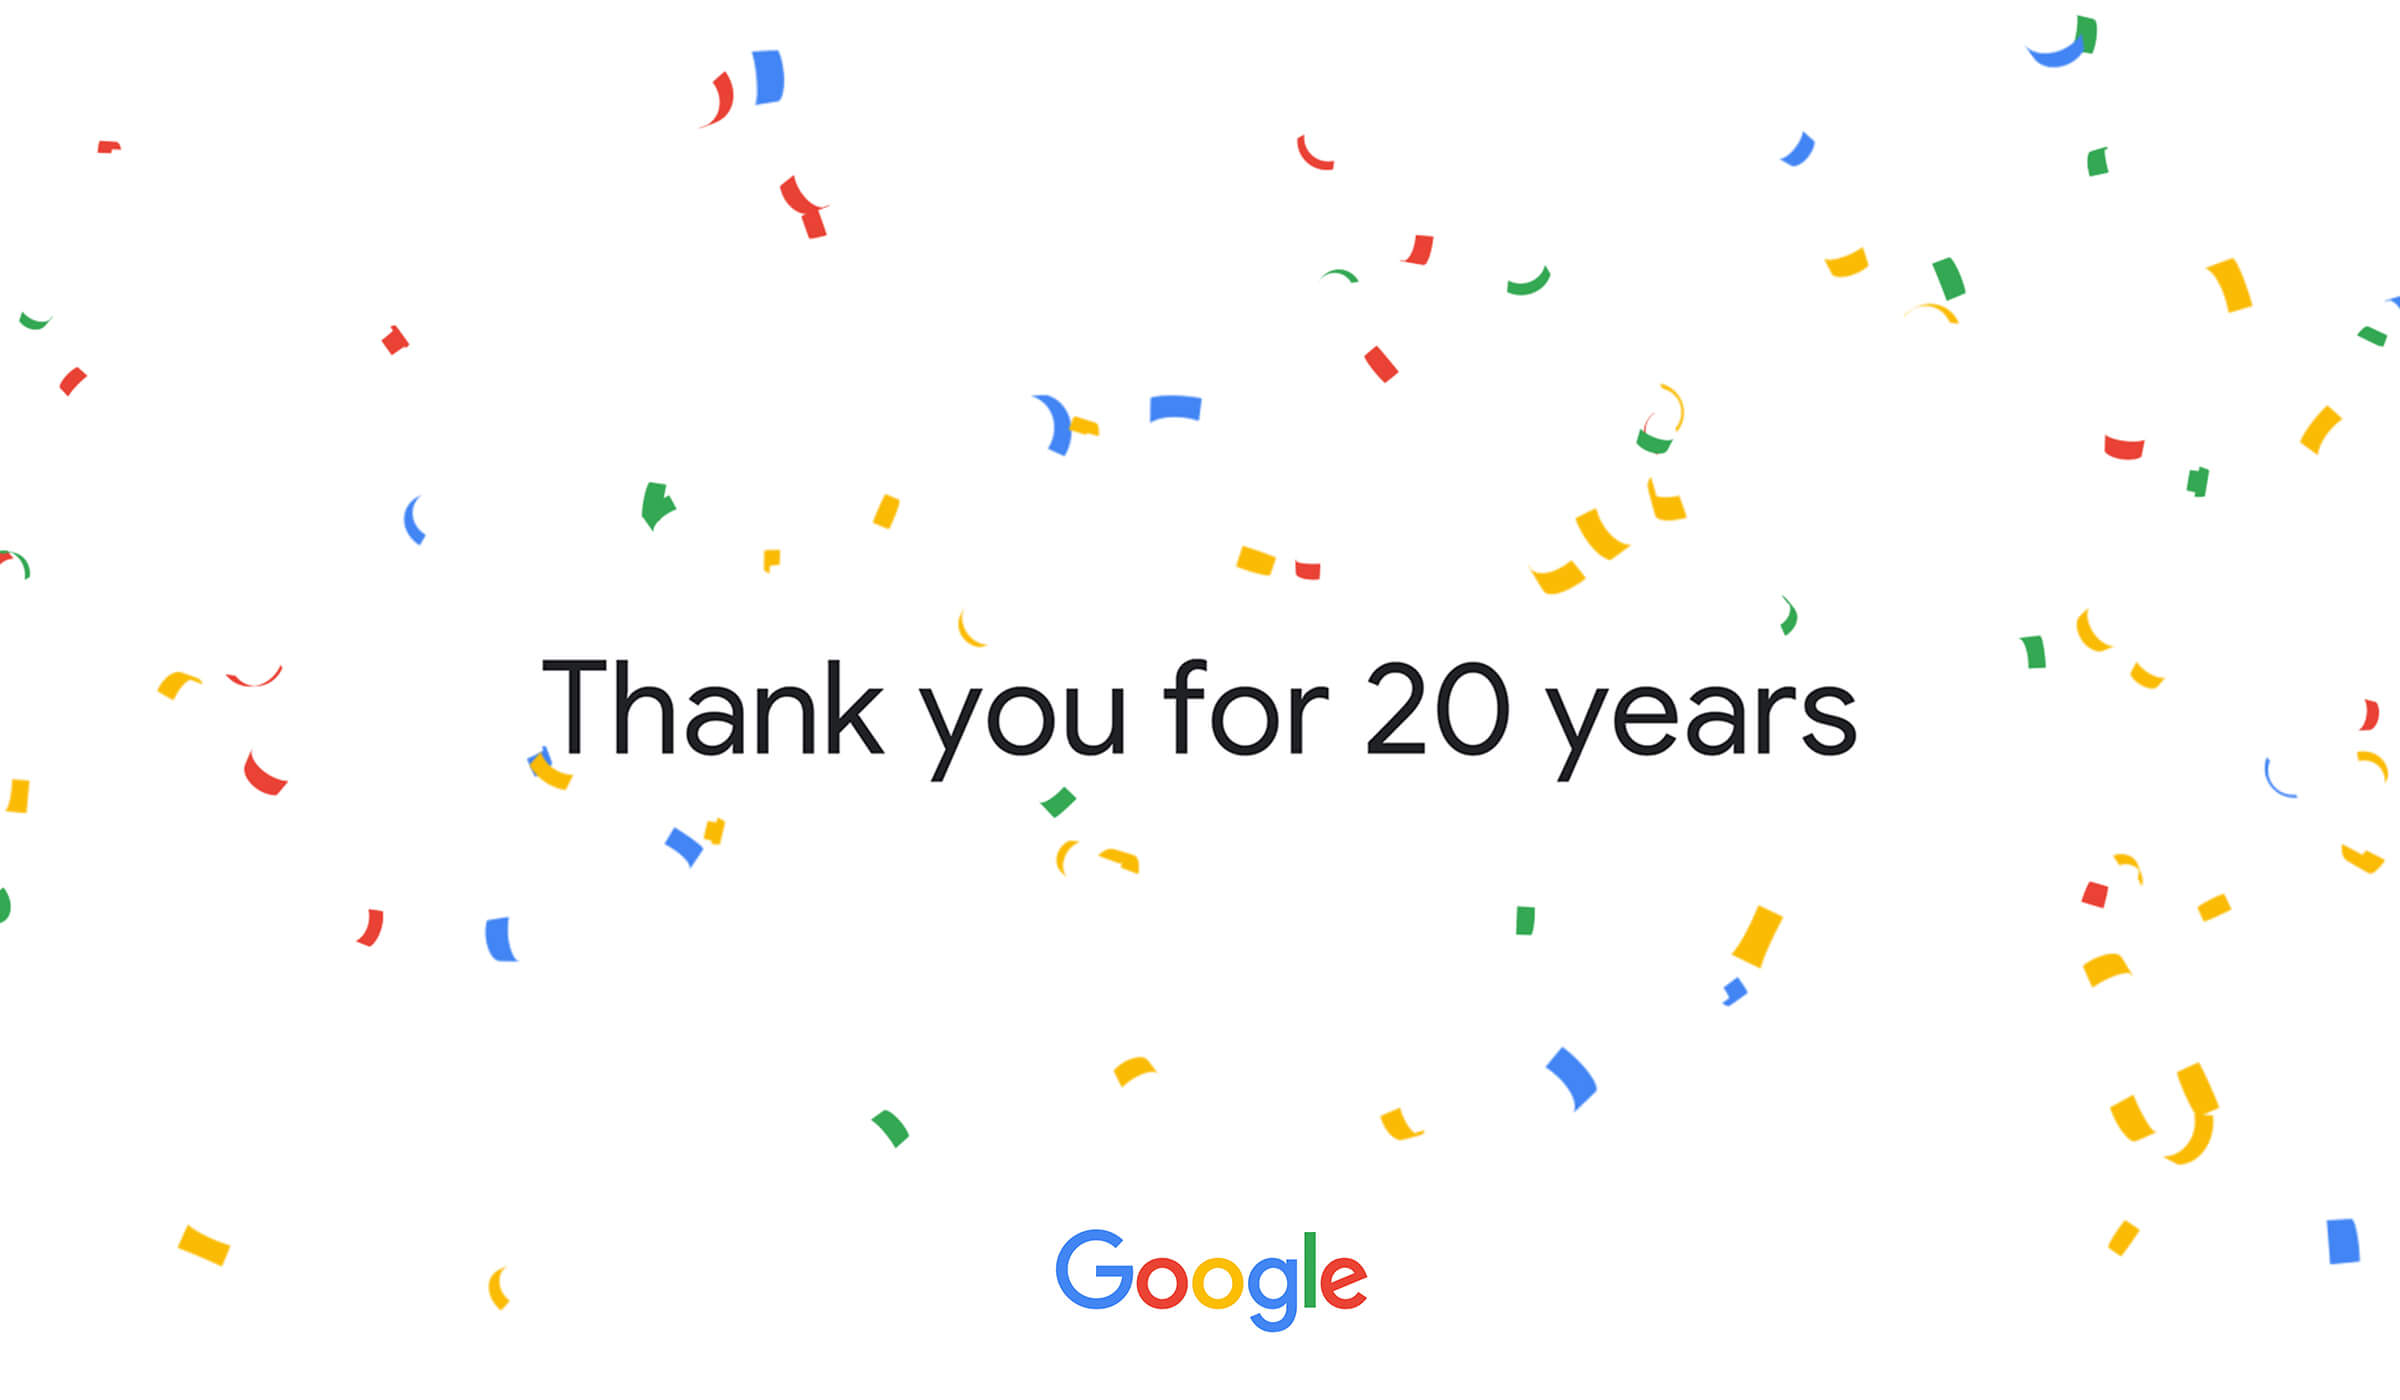 Thank you for 20 years | Google